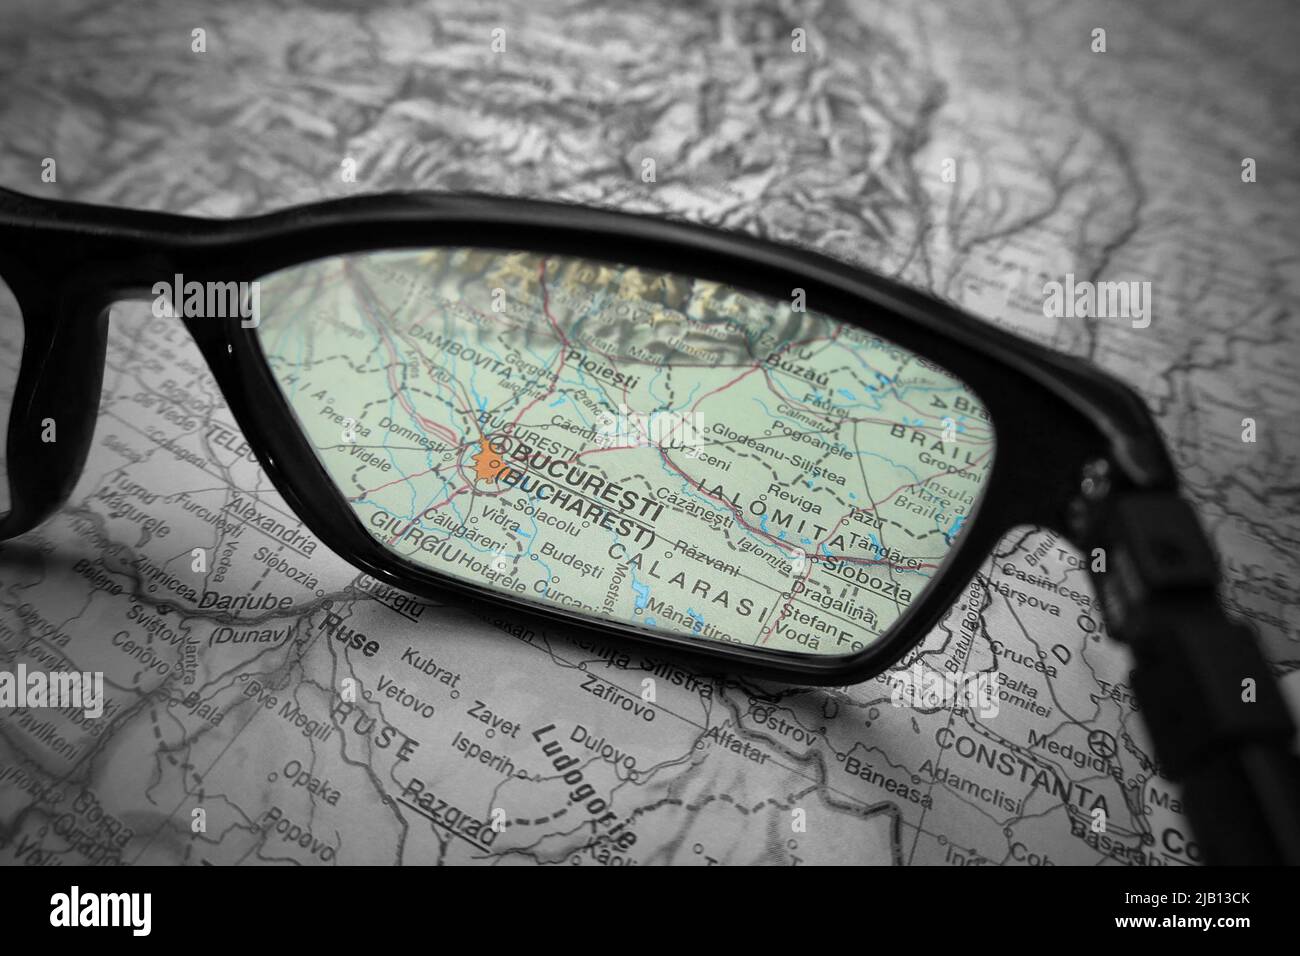 An creative illustrative image showing the country of Bucharest on a map through the lens of reading glasses. The word Bucharest in colour Stock Photo